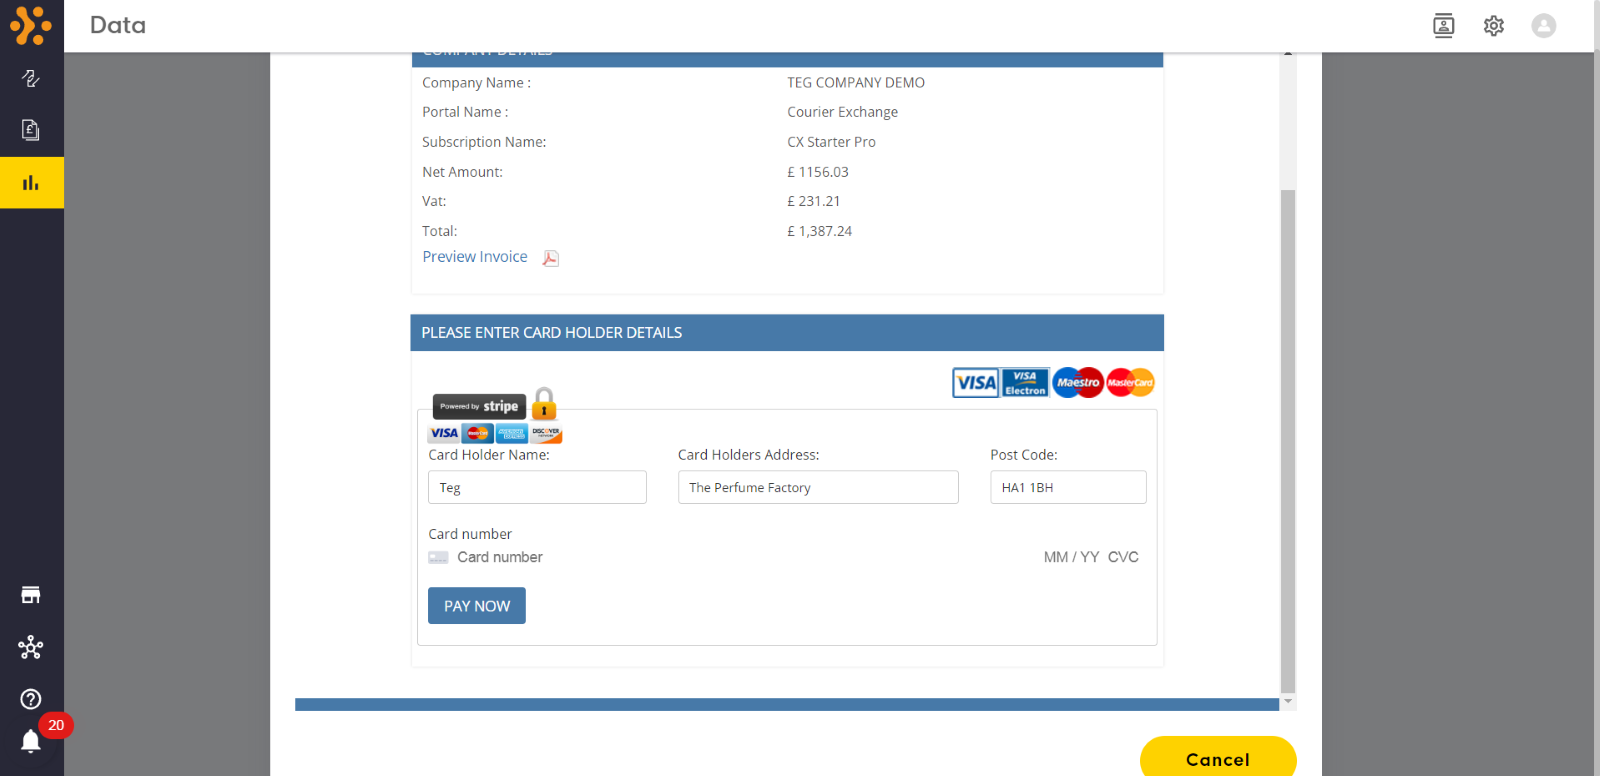 A screenshot of a credit card registration

Description automatically generated